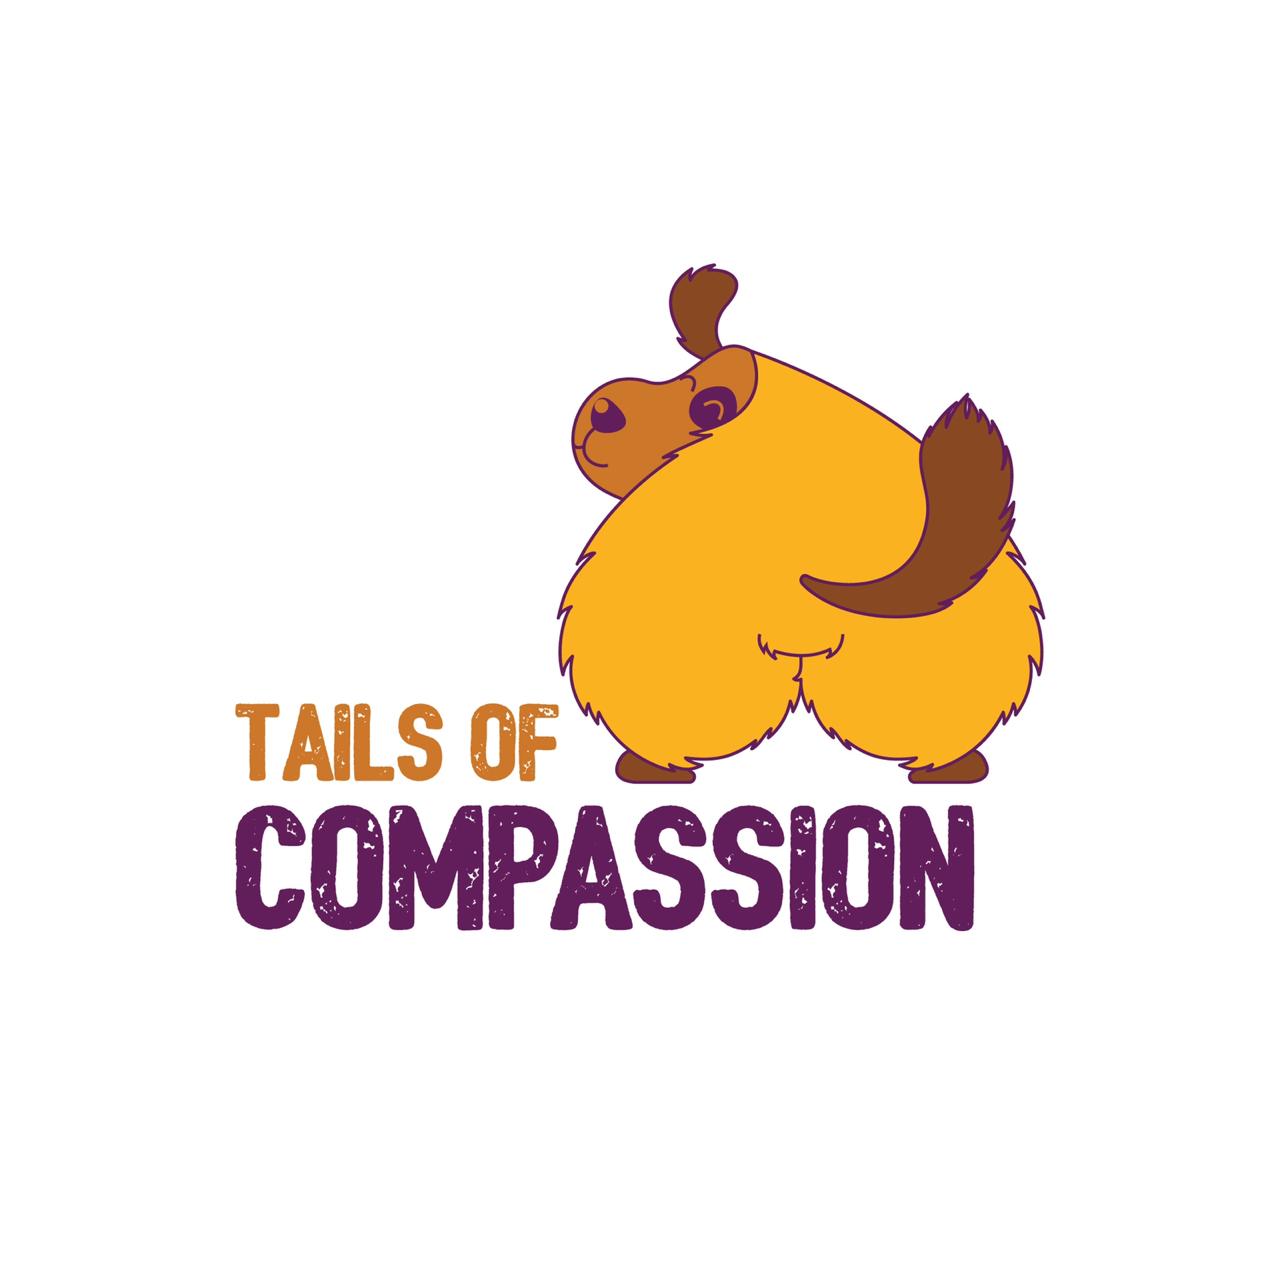 Tails of Compassion (ToC)